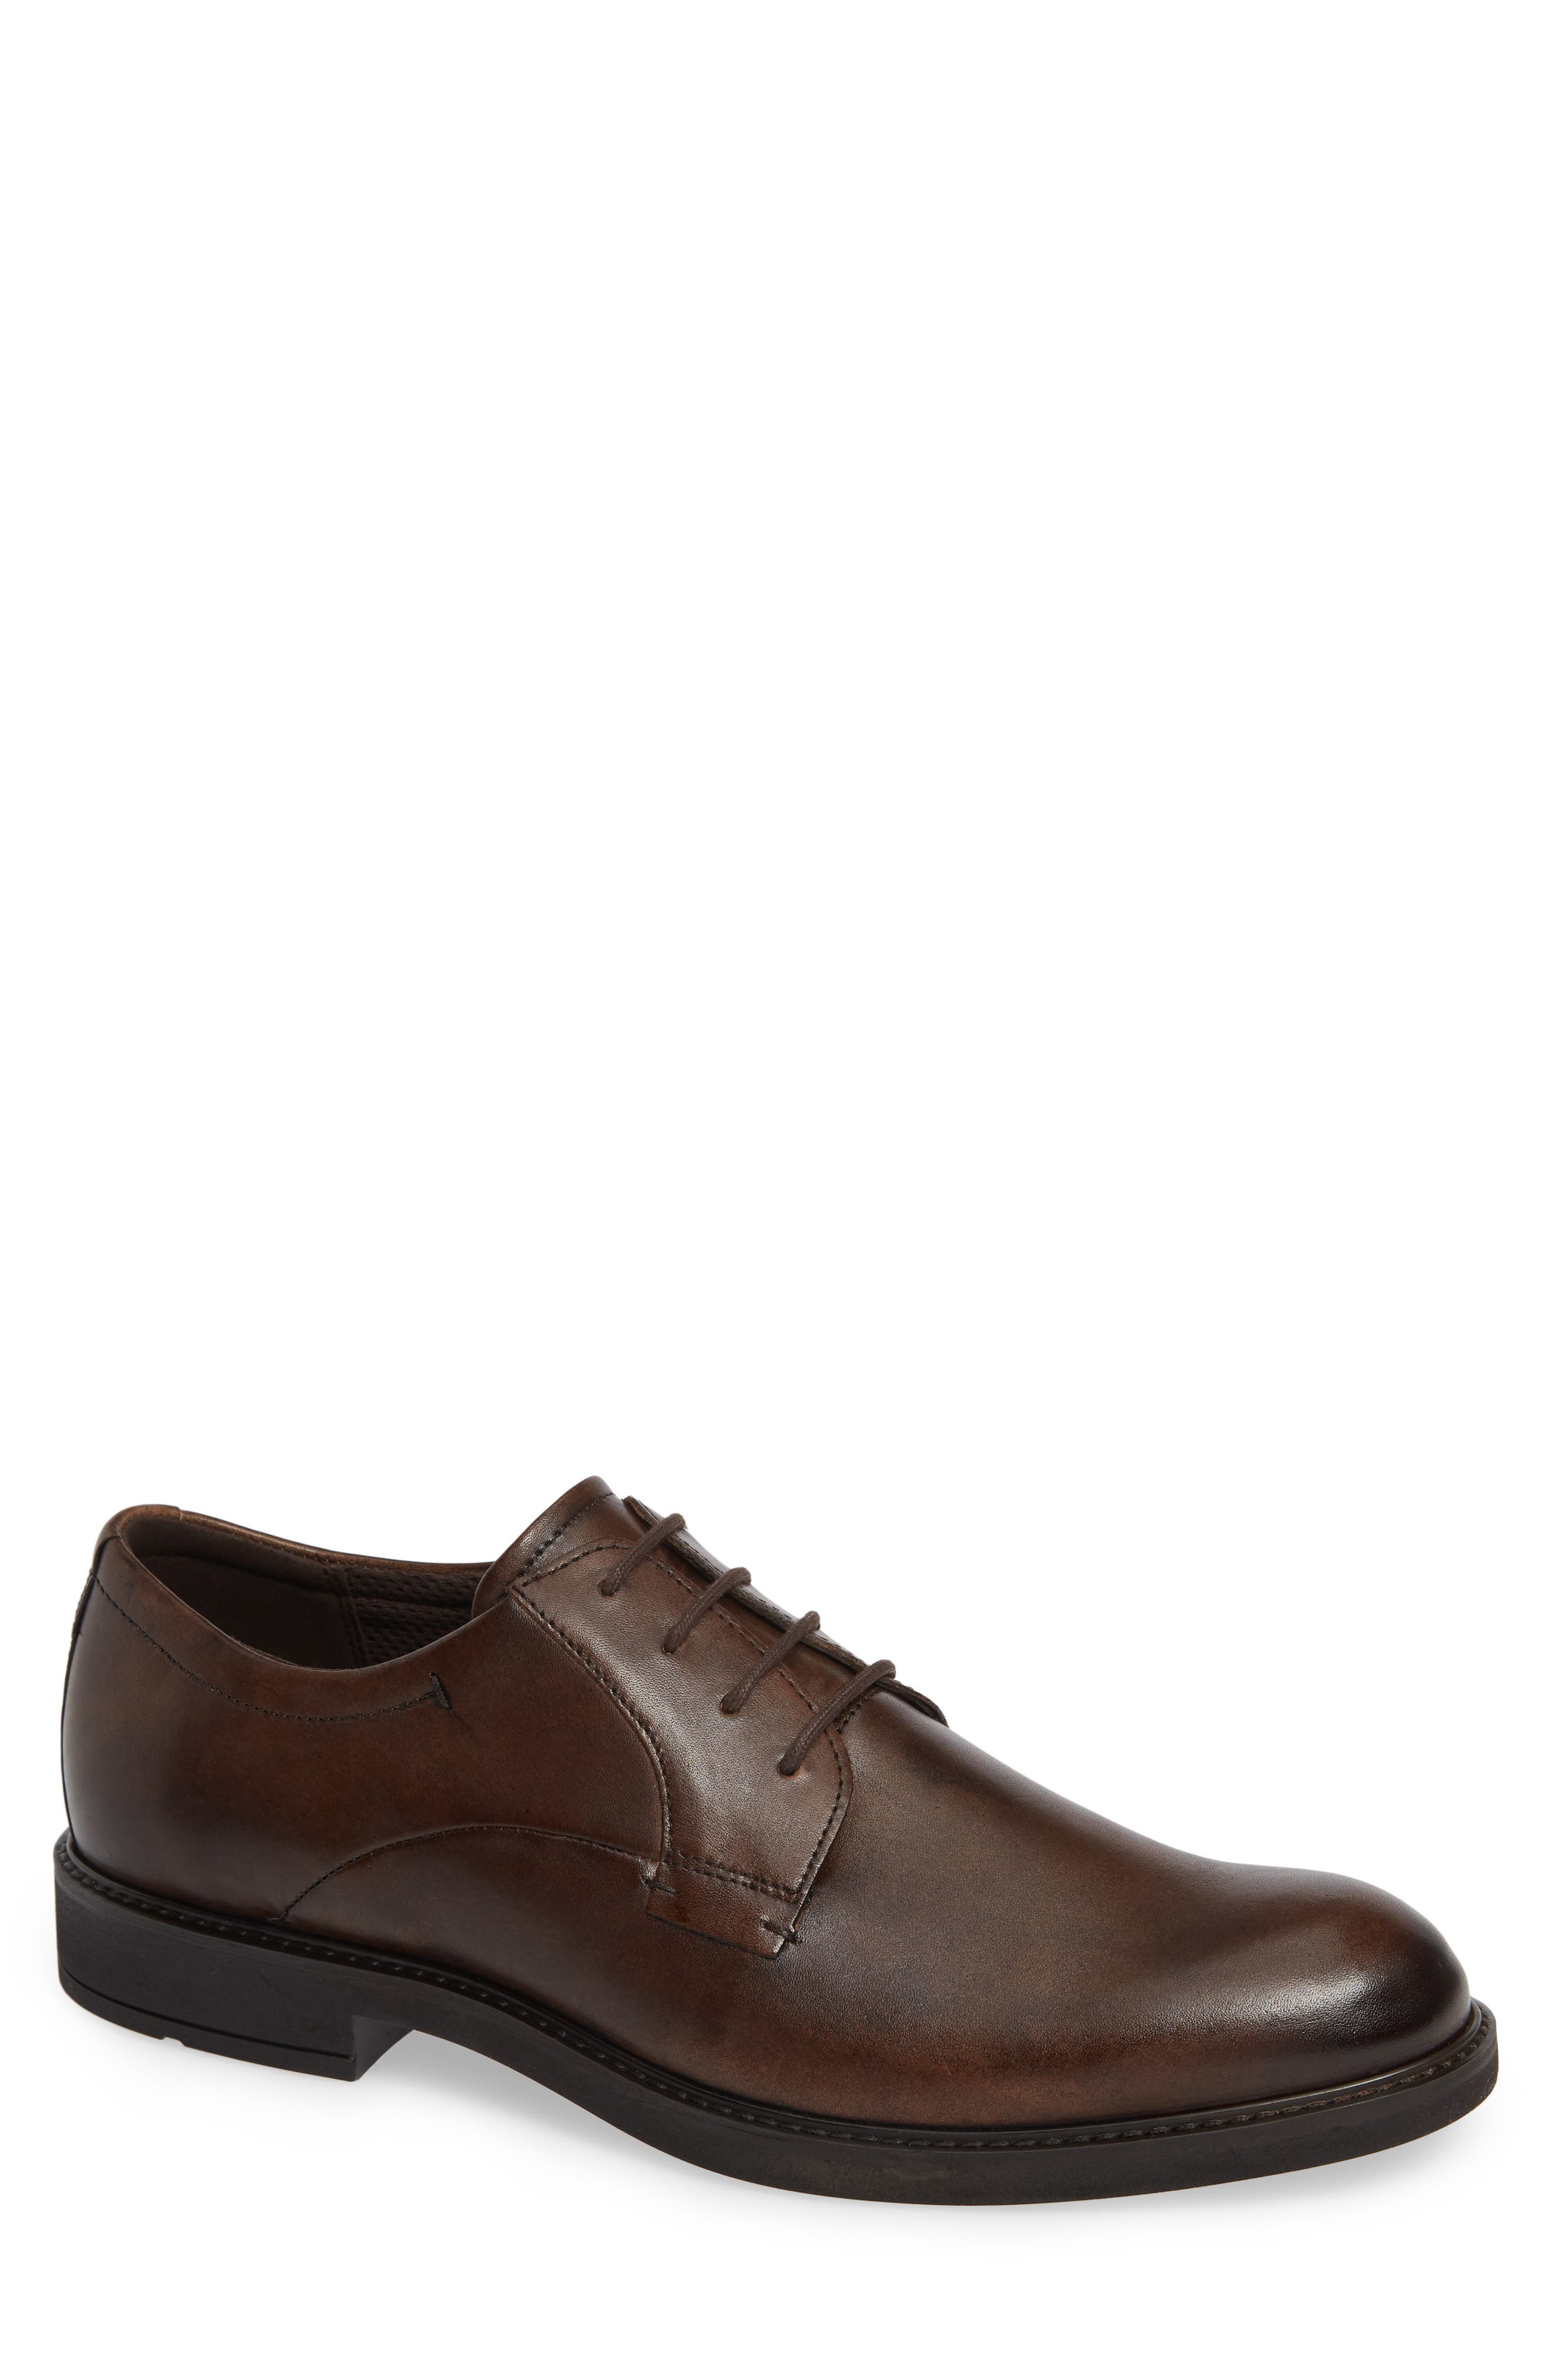 ecco derby,Free Shipping,Safe Payment